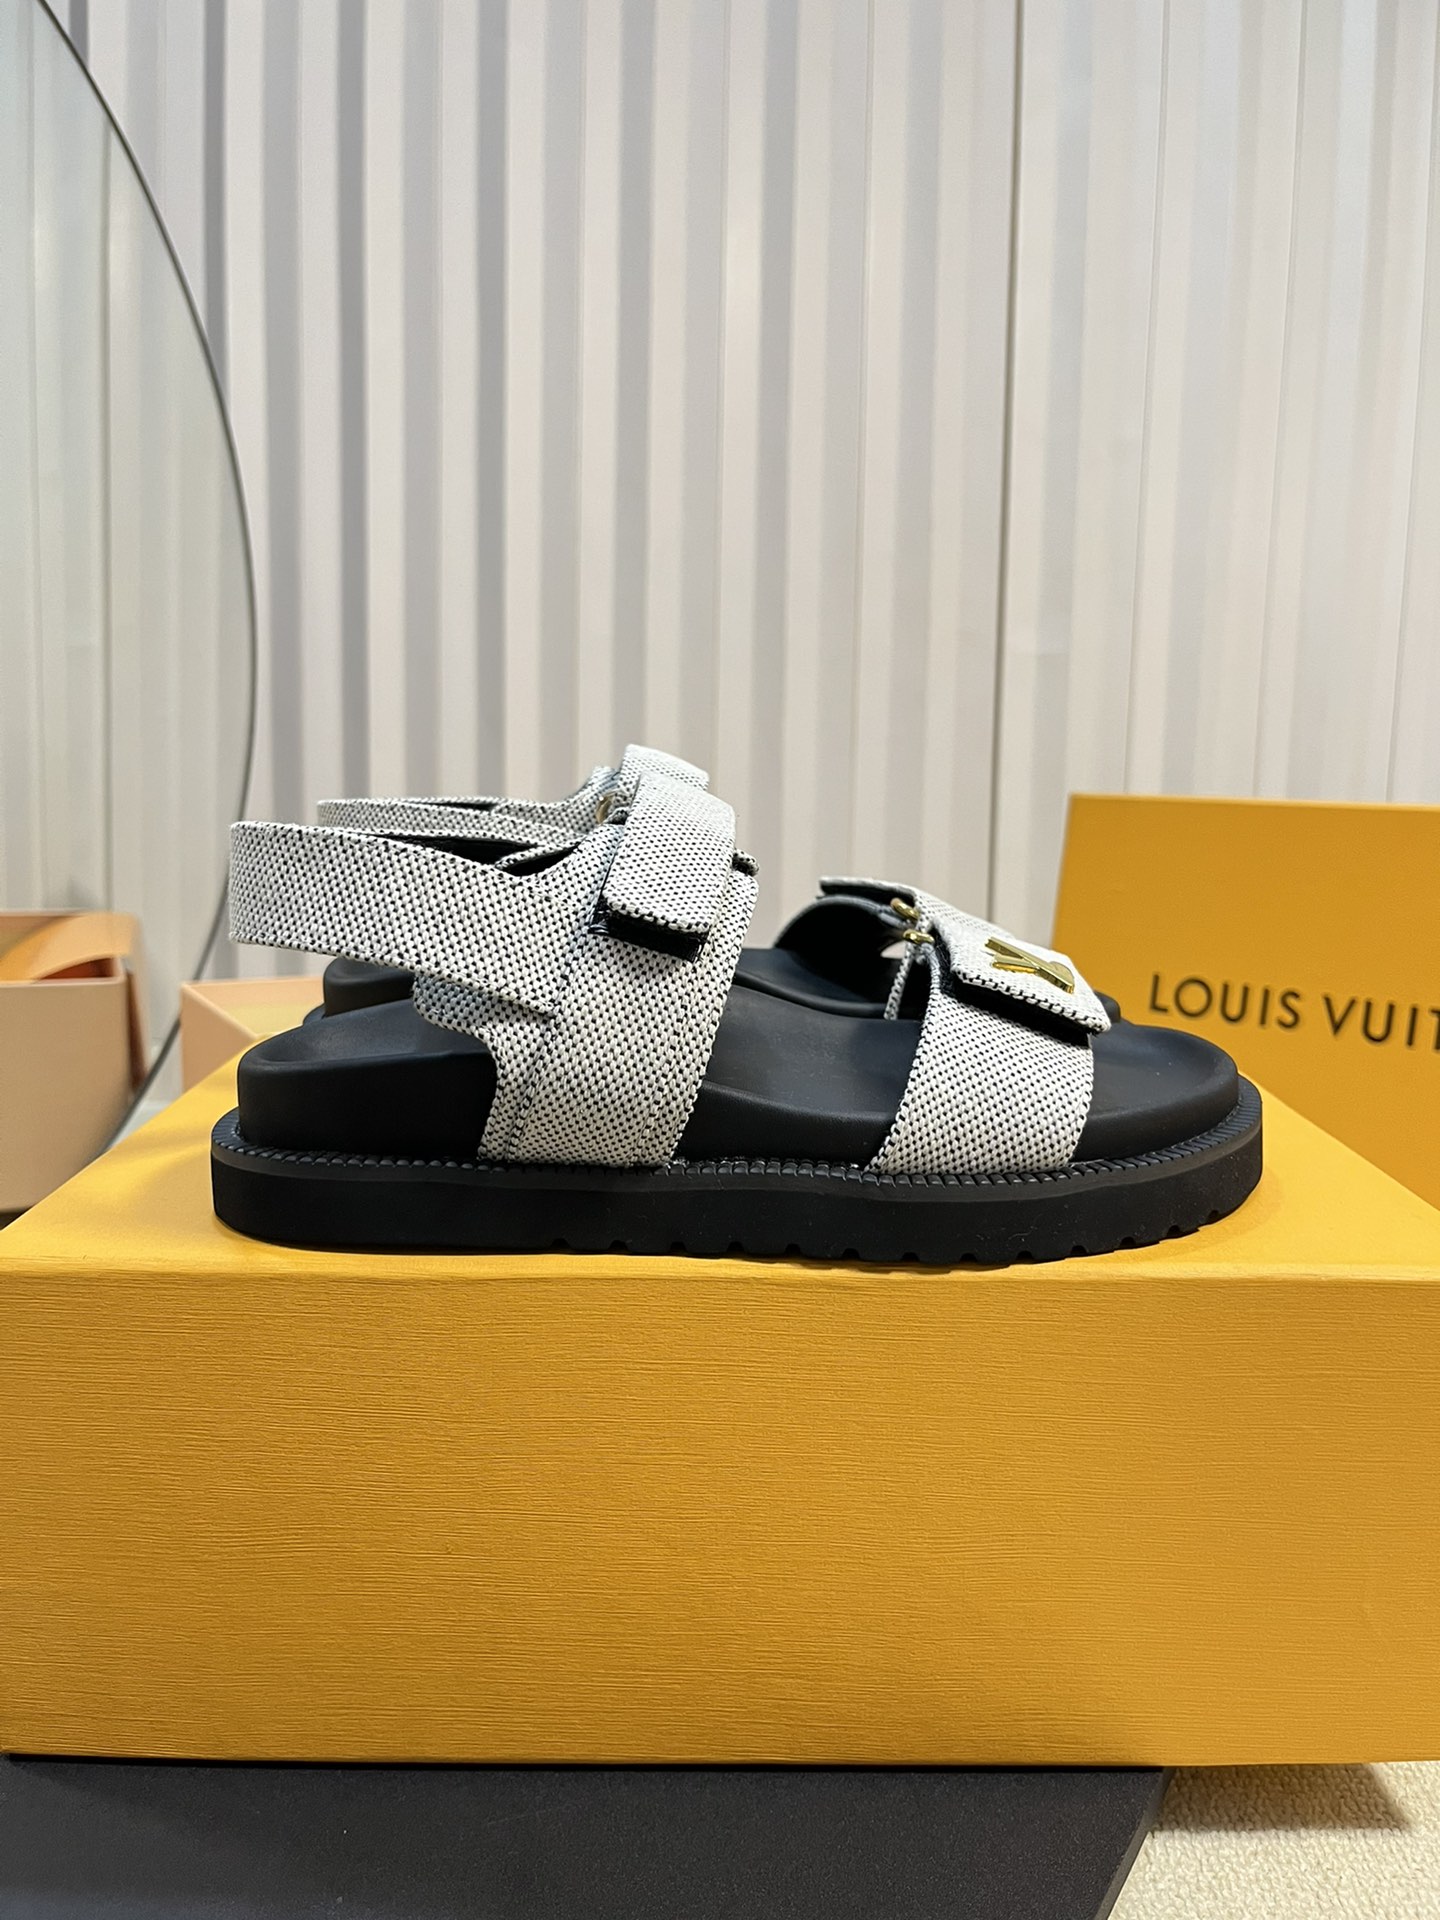 Louis Vuitton Shoes Sandals Printing Sheepskin Spring/Summer Collection